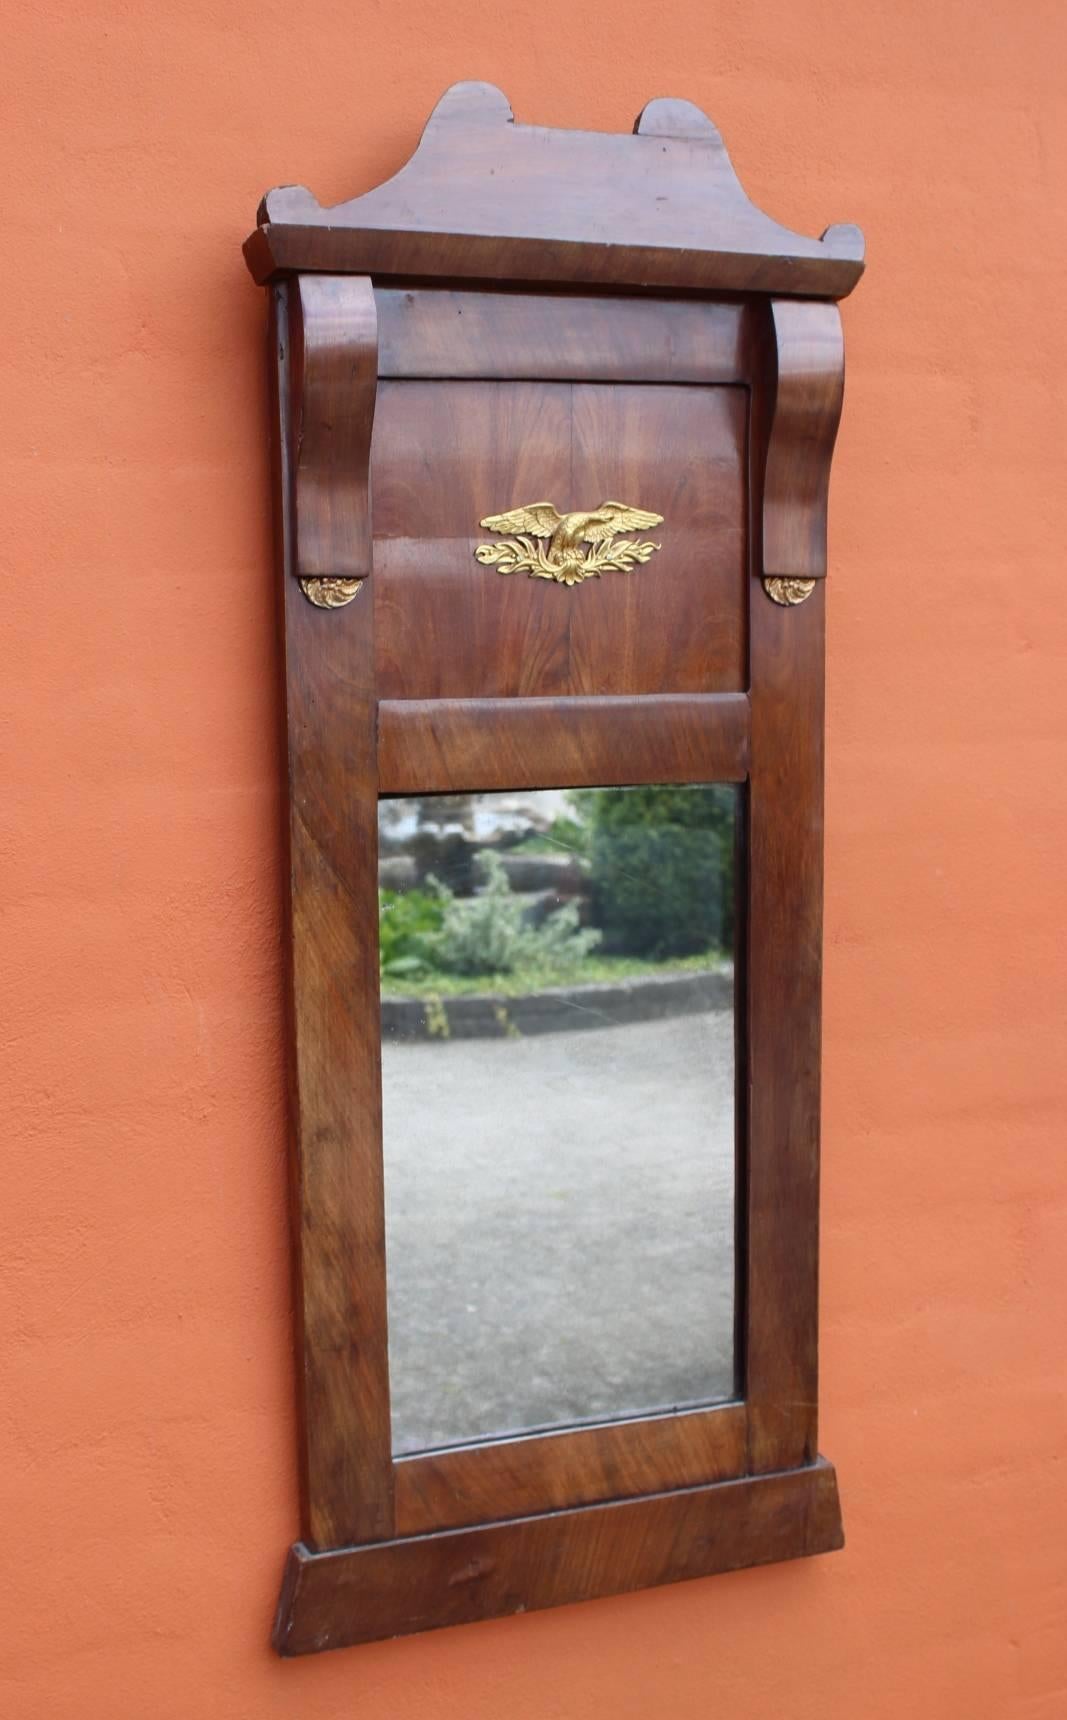 The Late Empire mahogany mirror, winged with elegant gold leaf, dates back to around 1840 and exudes a distinguished elegance and historical value. The mirror's sophisticated design and artistic details make it a remarkable piece of antique that